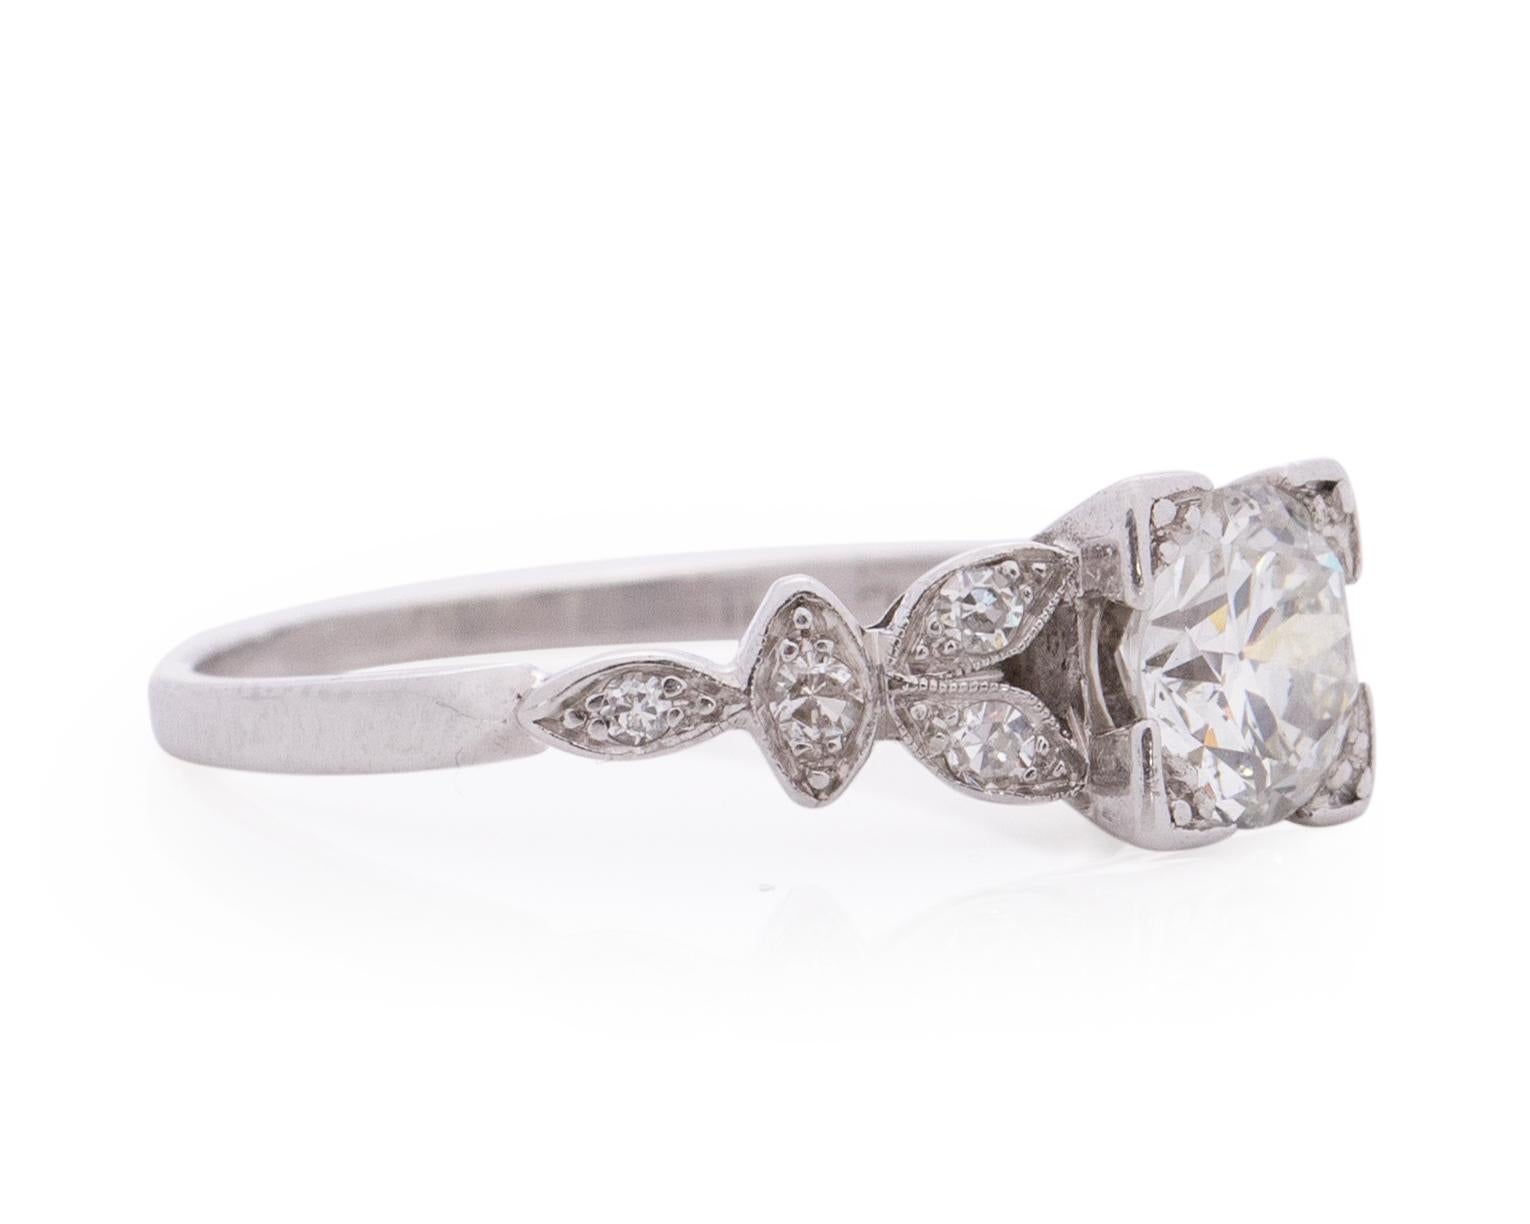 Item Details: 
Ring Size: 7.75
Metal Type: Platinum [Hallmarked, and Tested]
Weight: 3.4 grams

Center Diamond Details:
Weight: 1.01 Carat
Cut: Old European brilliant
Color: G
Clarity: SI2
Measurements: 6.5mm x 6.5mm

Side Stone Details:
Weight: .10